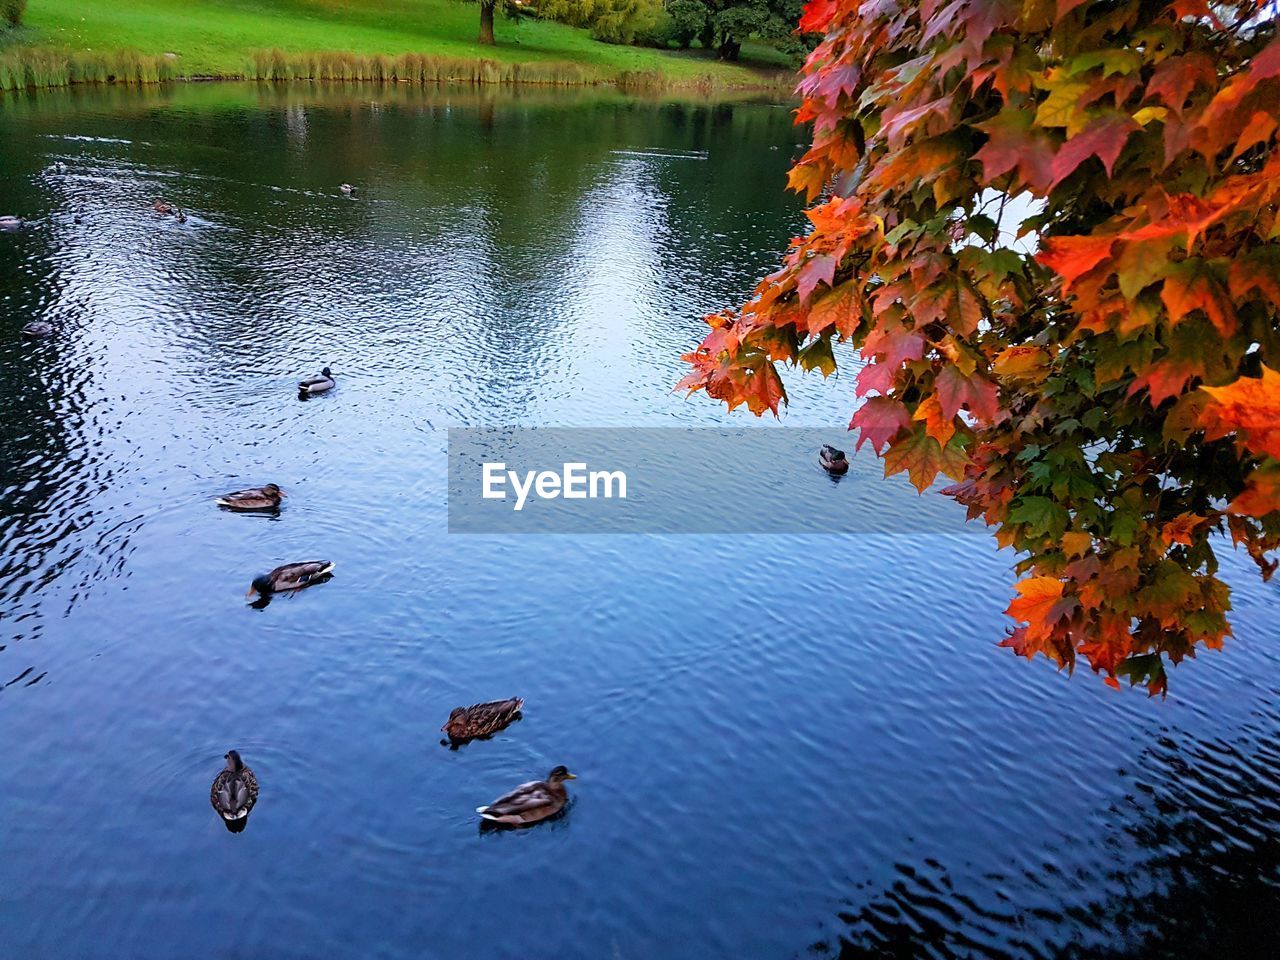 DUCKS SWIMMING IN LAKE WITH AUTUMN LEAVES